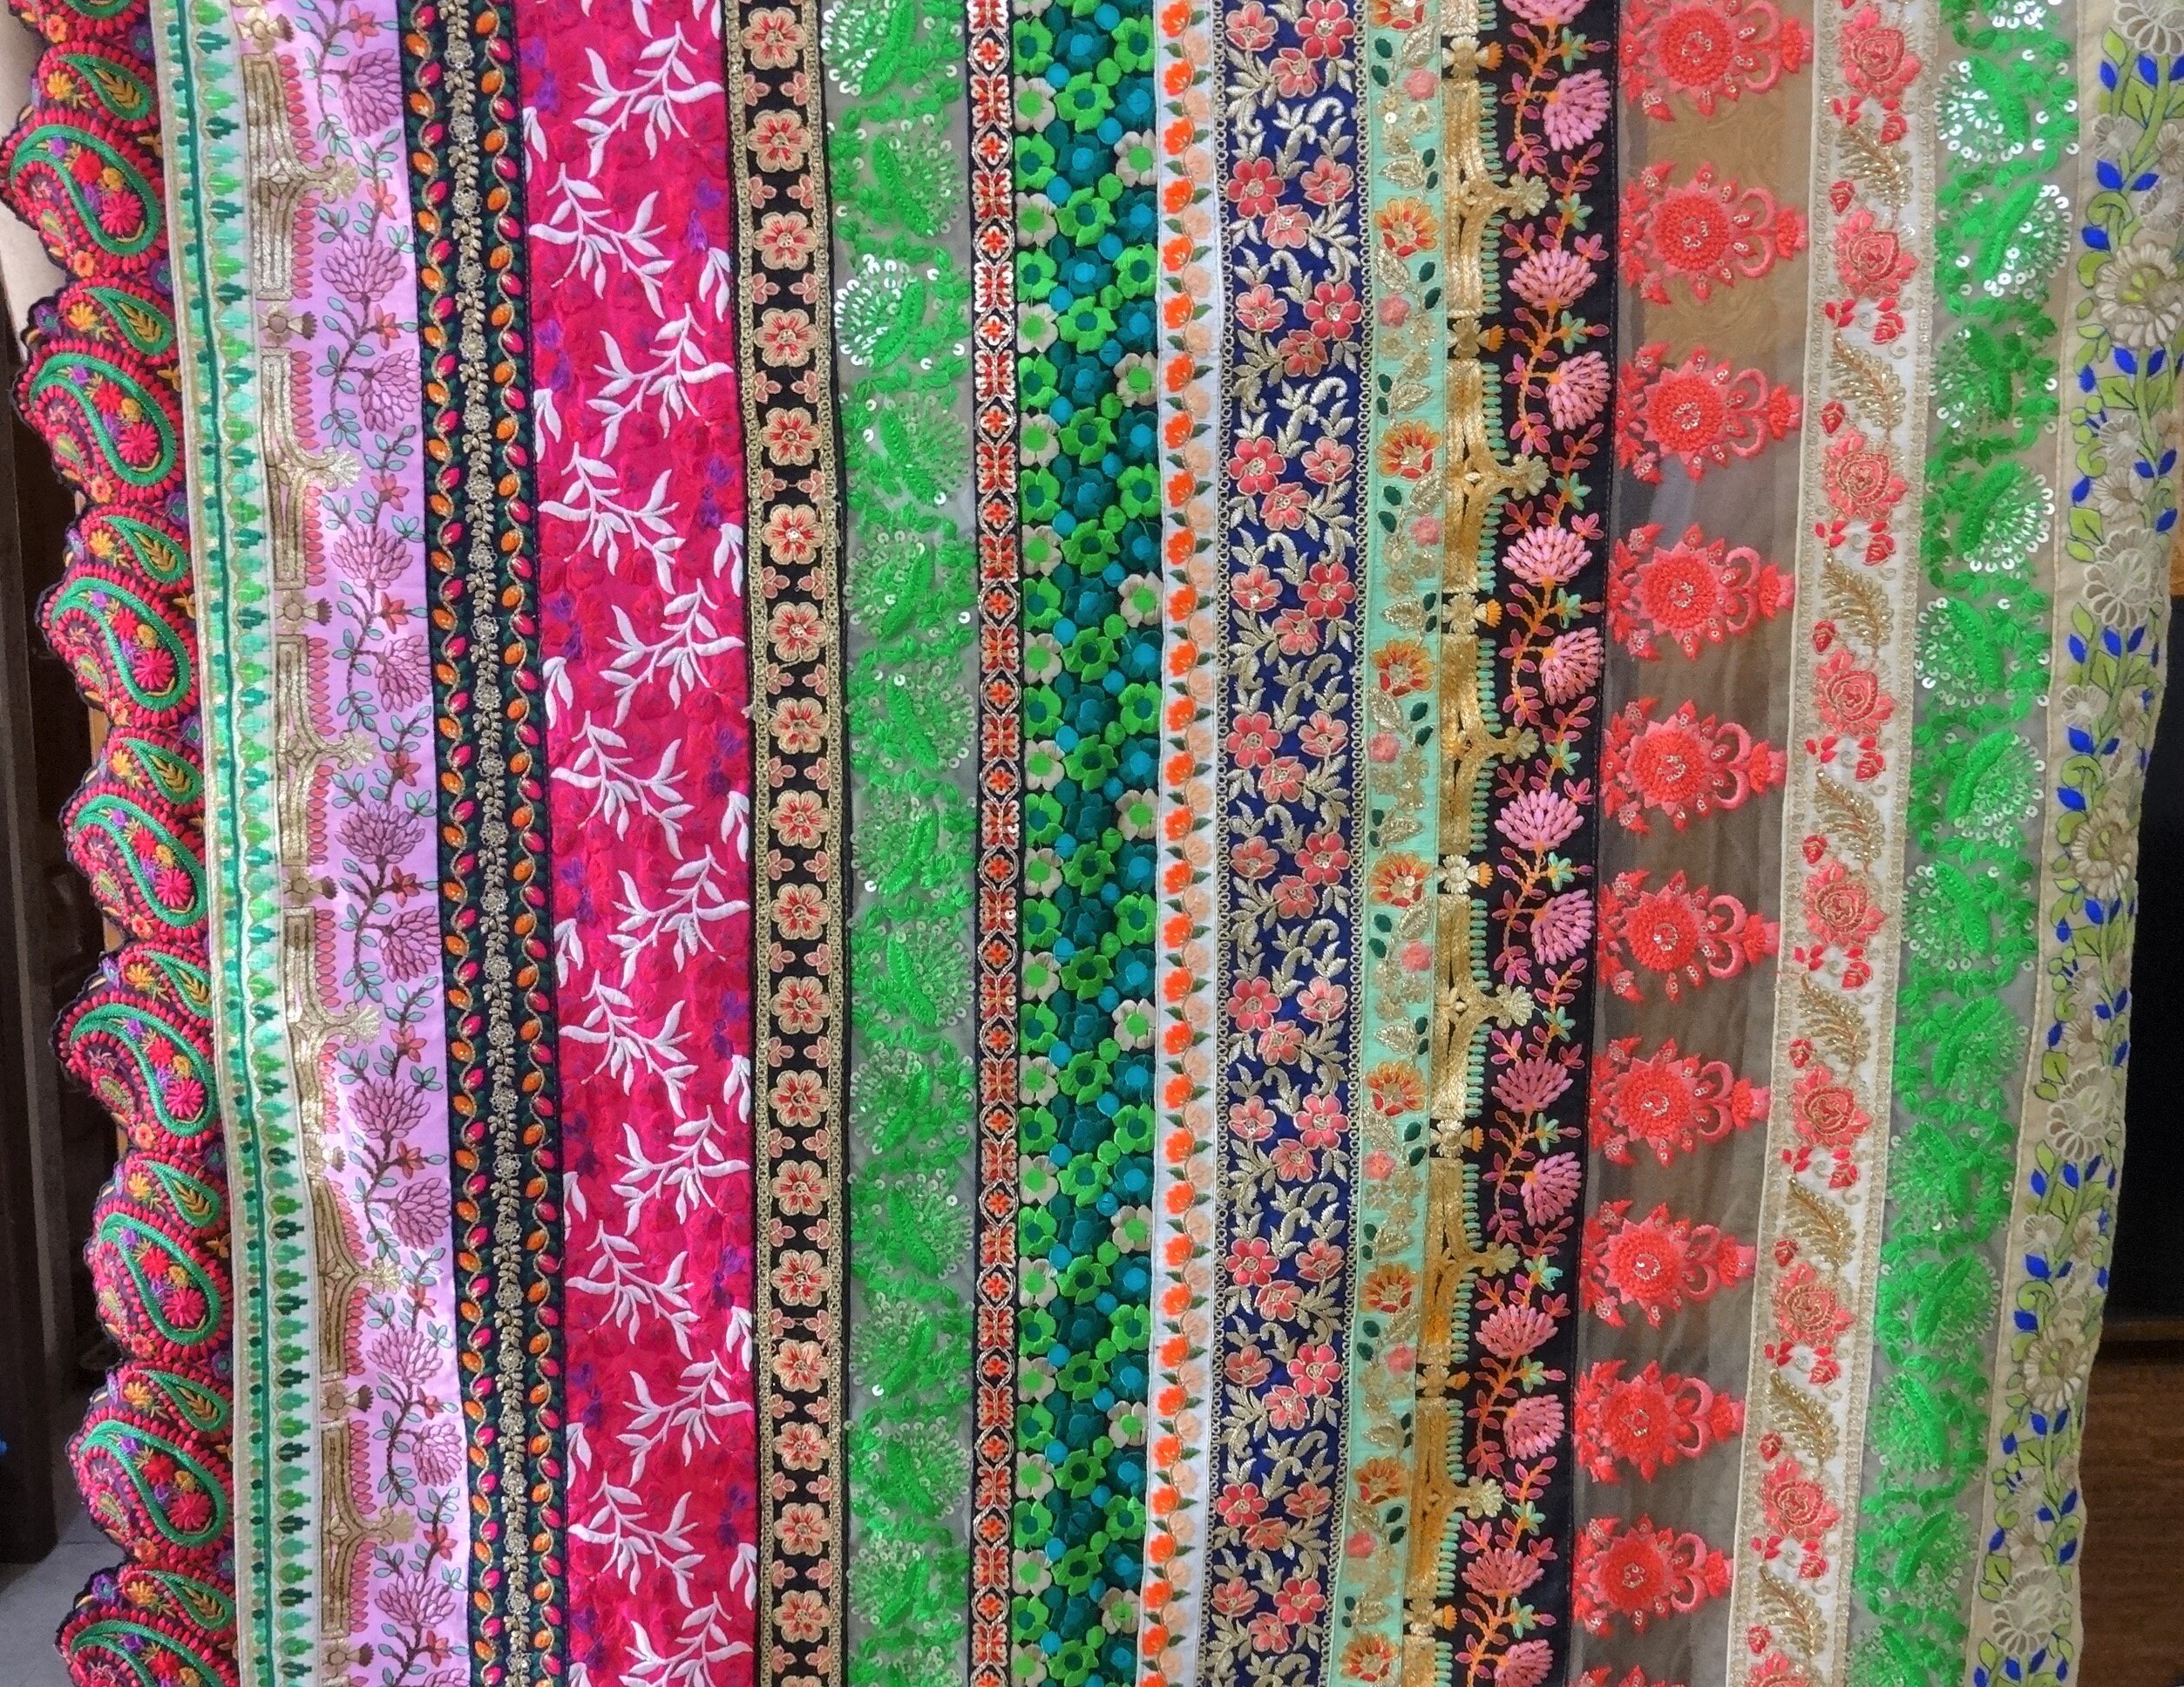 Indian Embroidered Fabric, Lace Work Fabrics, Indian Textile, Boho